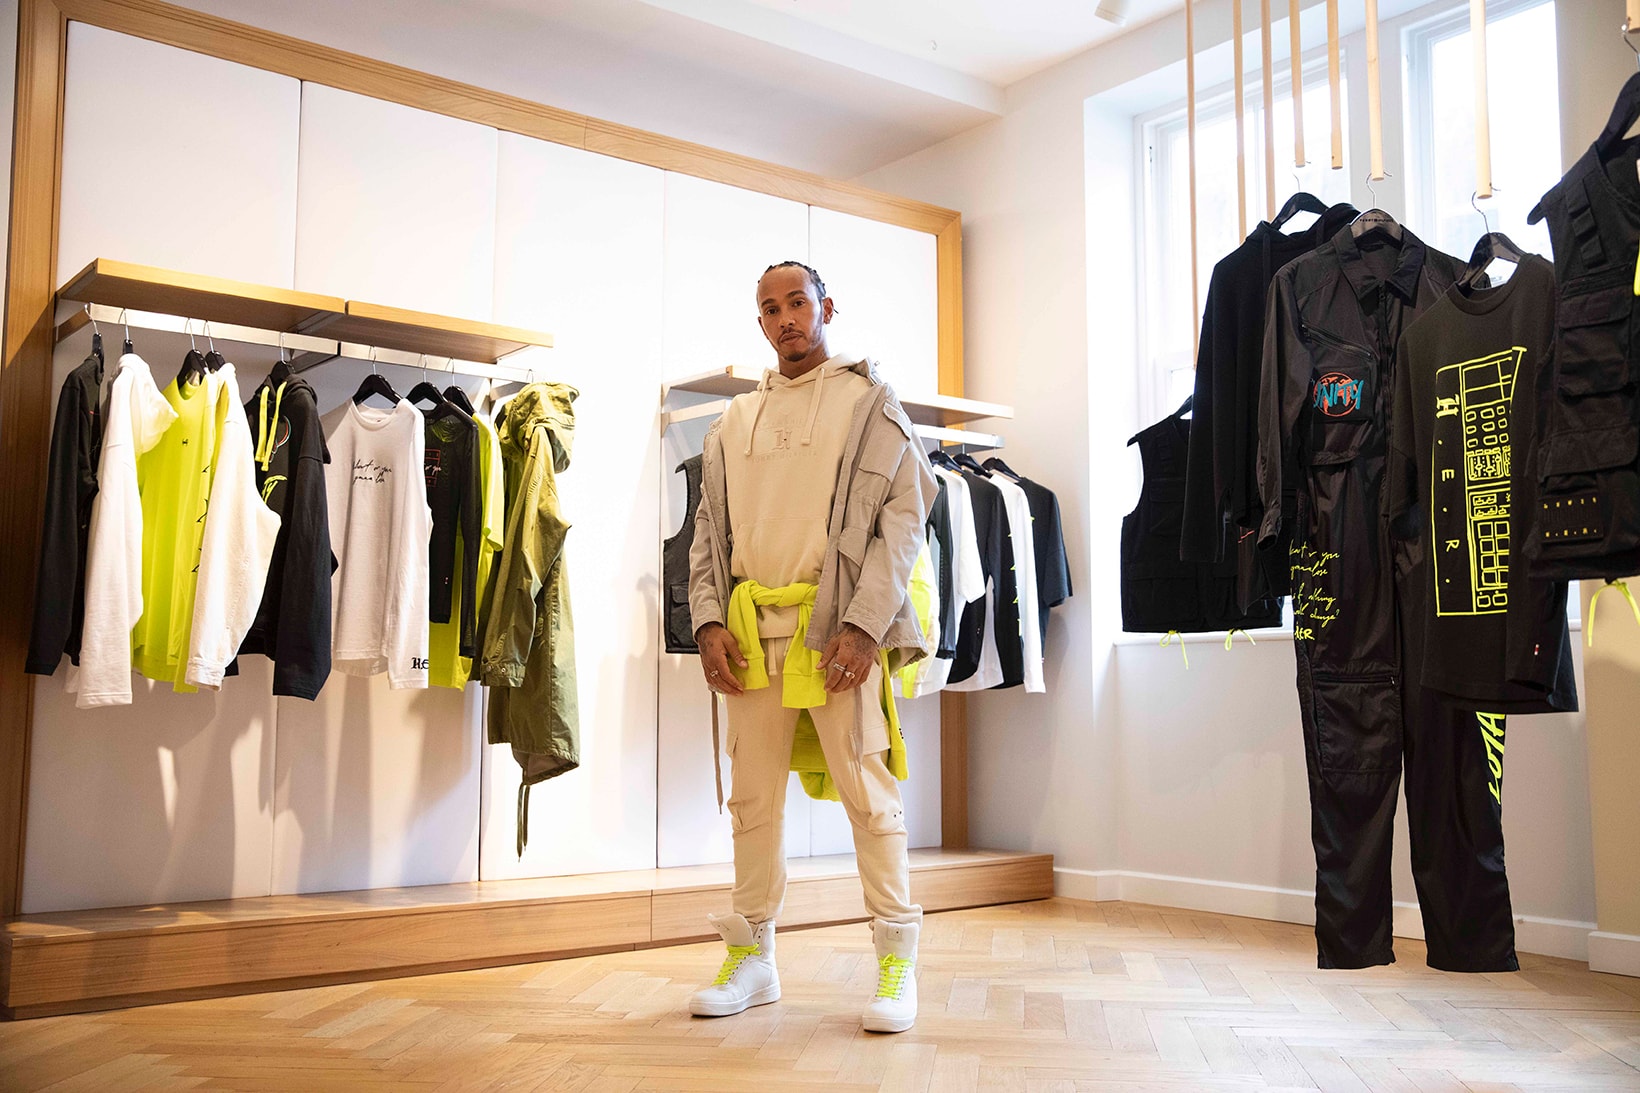 tommy hilfiger her lewis hamilton collaboration spring summer hoodies shirts joggers sweatpants sneakers neon green black